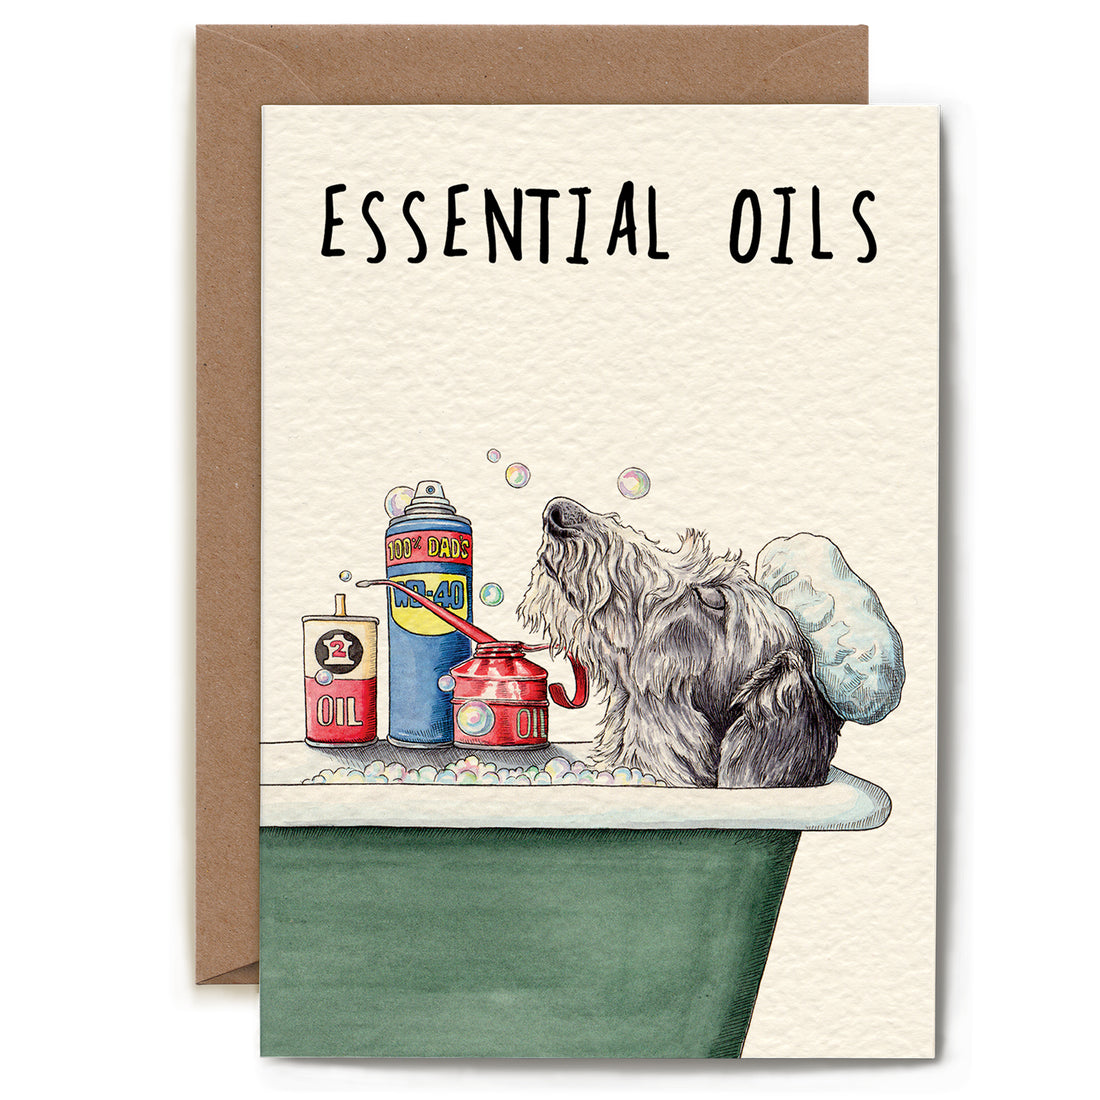 Cheeky and witty Essential Oils Card featuring adorable animal illustrations by Hester &amp; Cook.